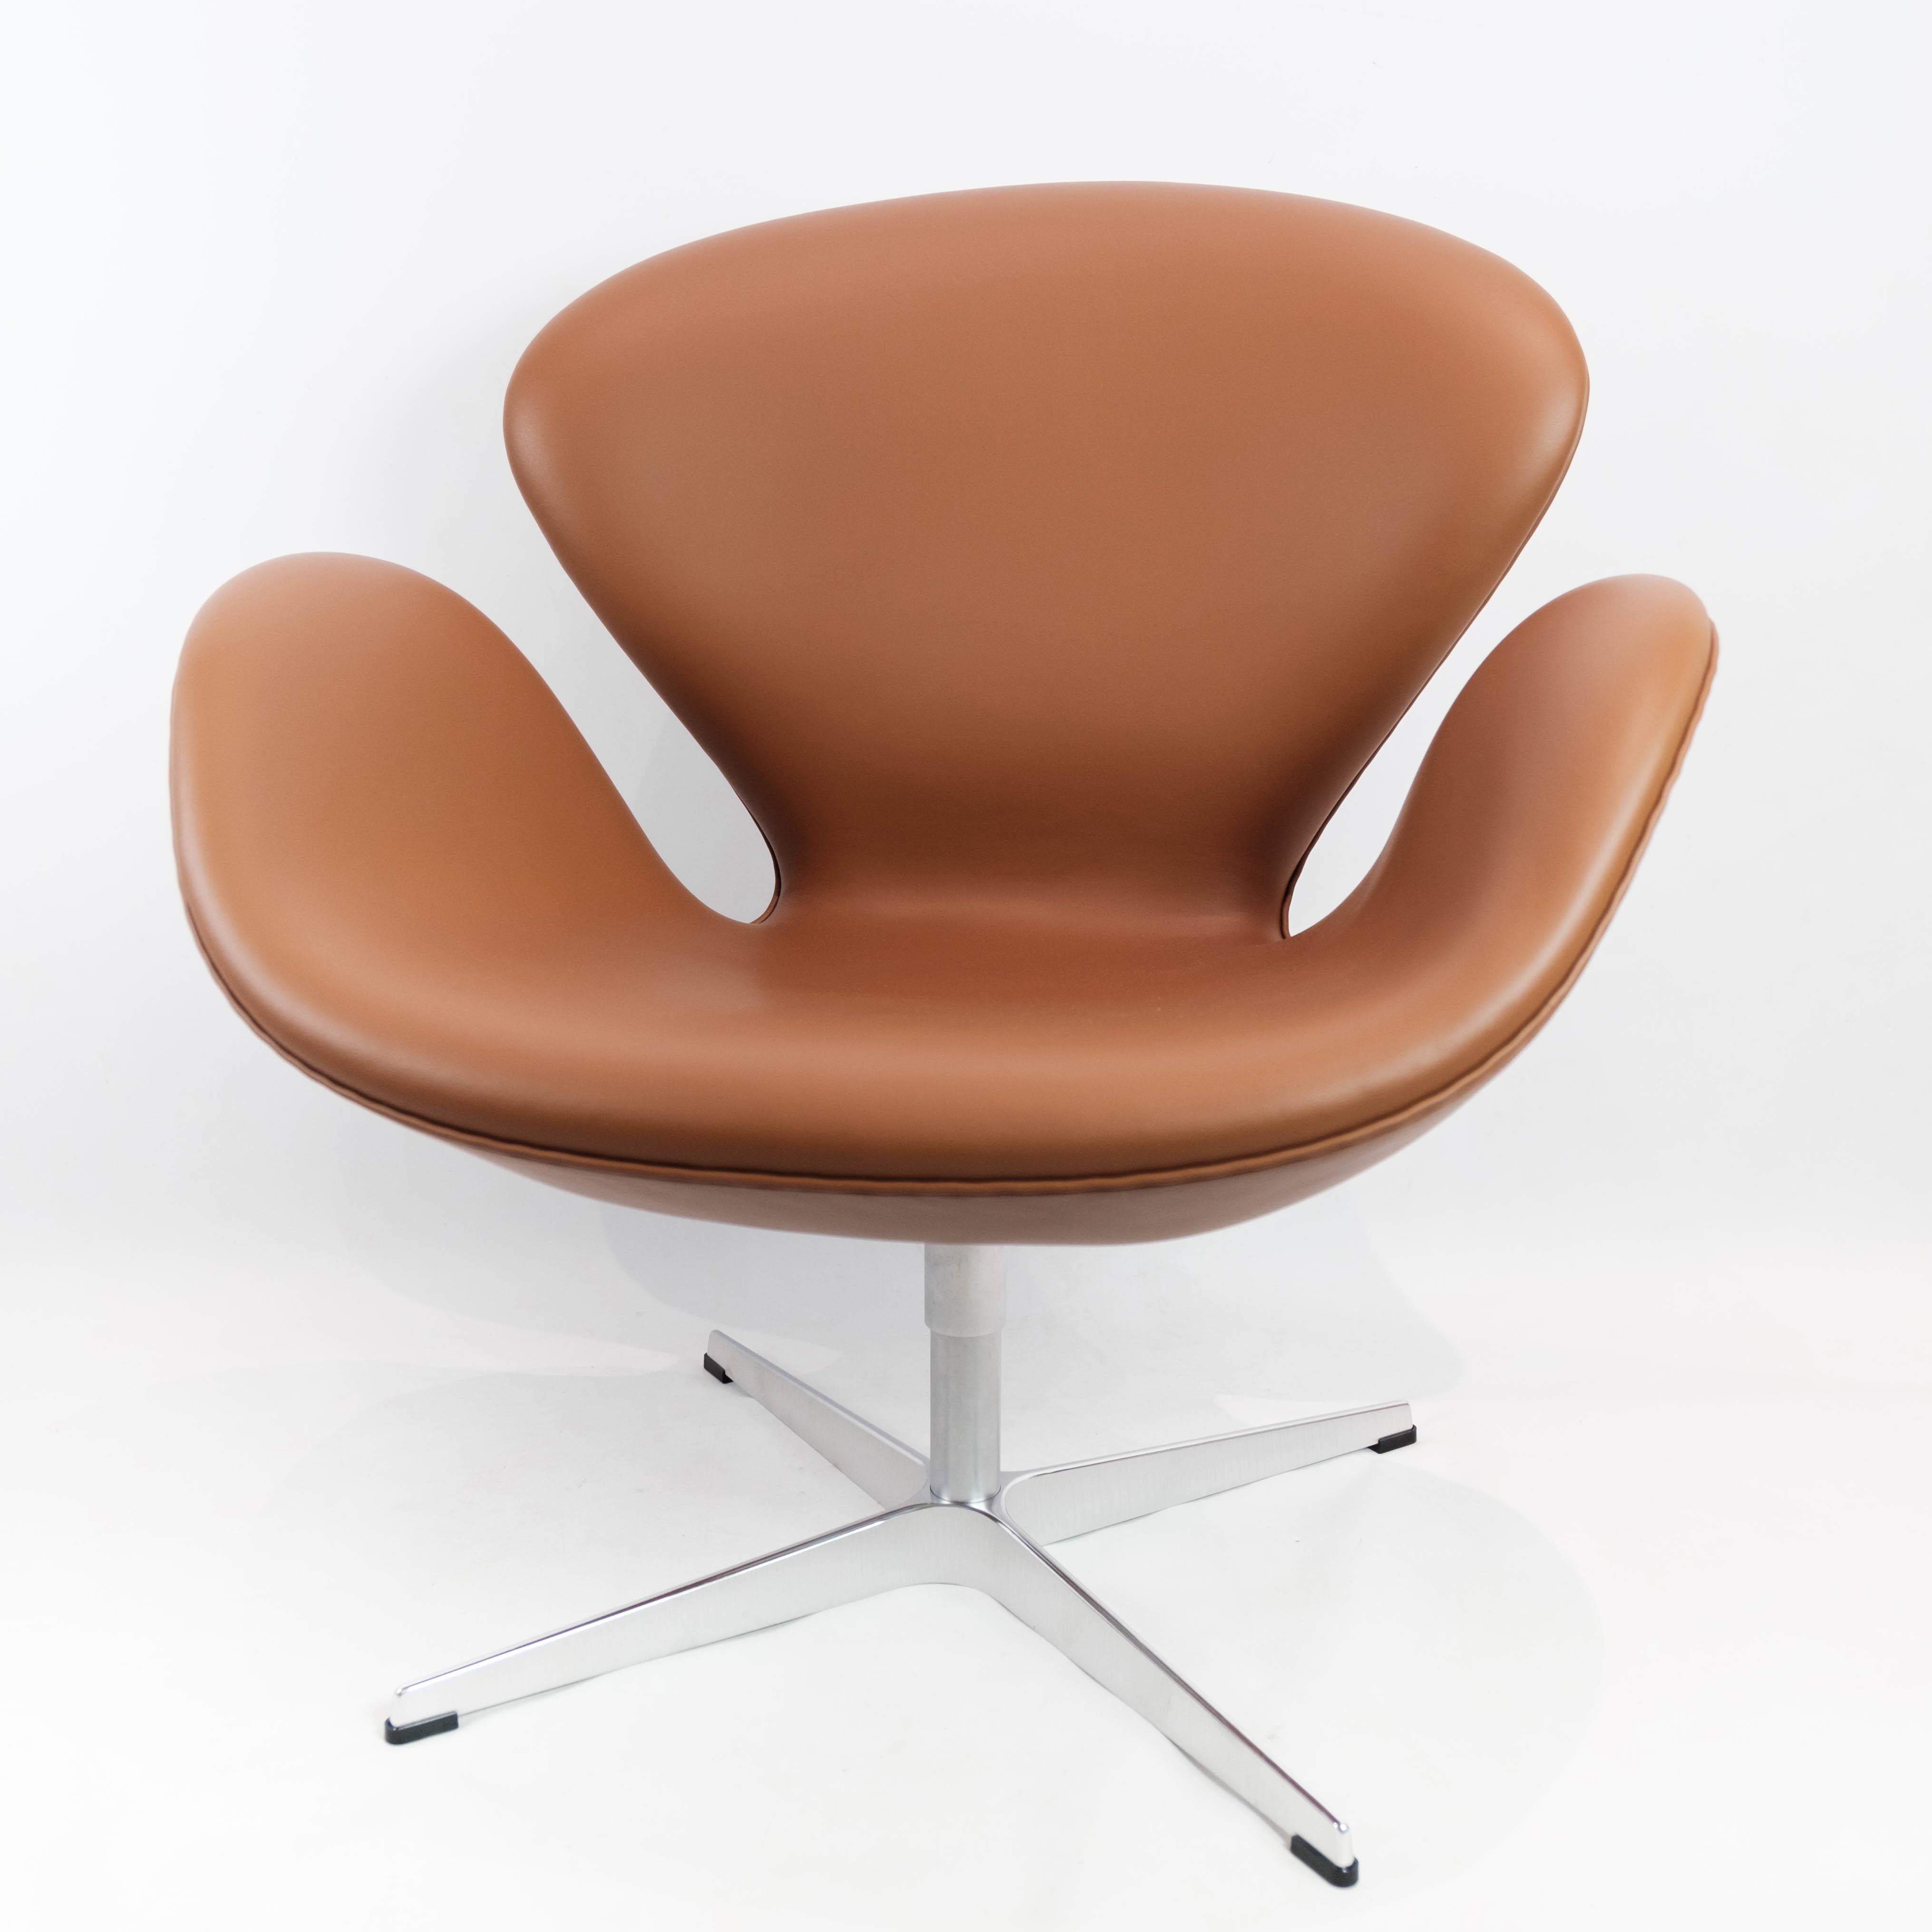 The swan chair, model 3320, designed by Arne Jacobsen in 1958 and manufactured by Fritz Hansen. The chair is with original upholstery in Walnut elegance and is in perfect condition.